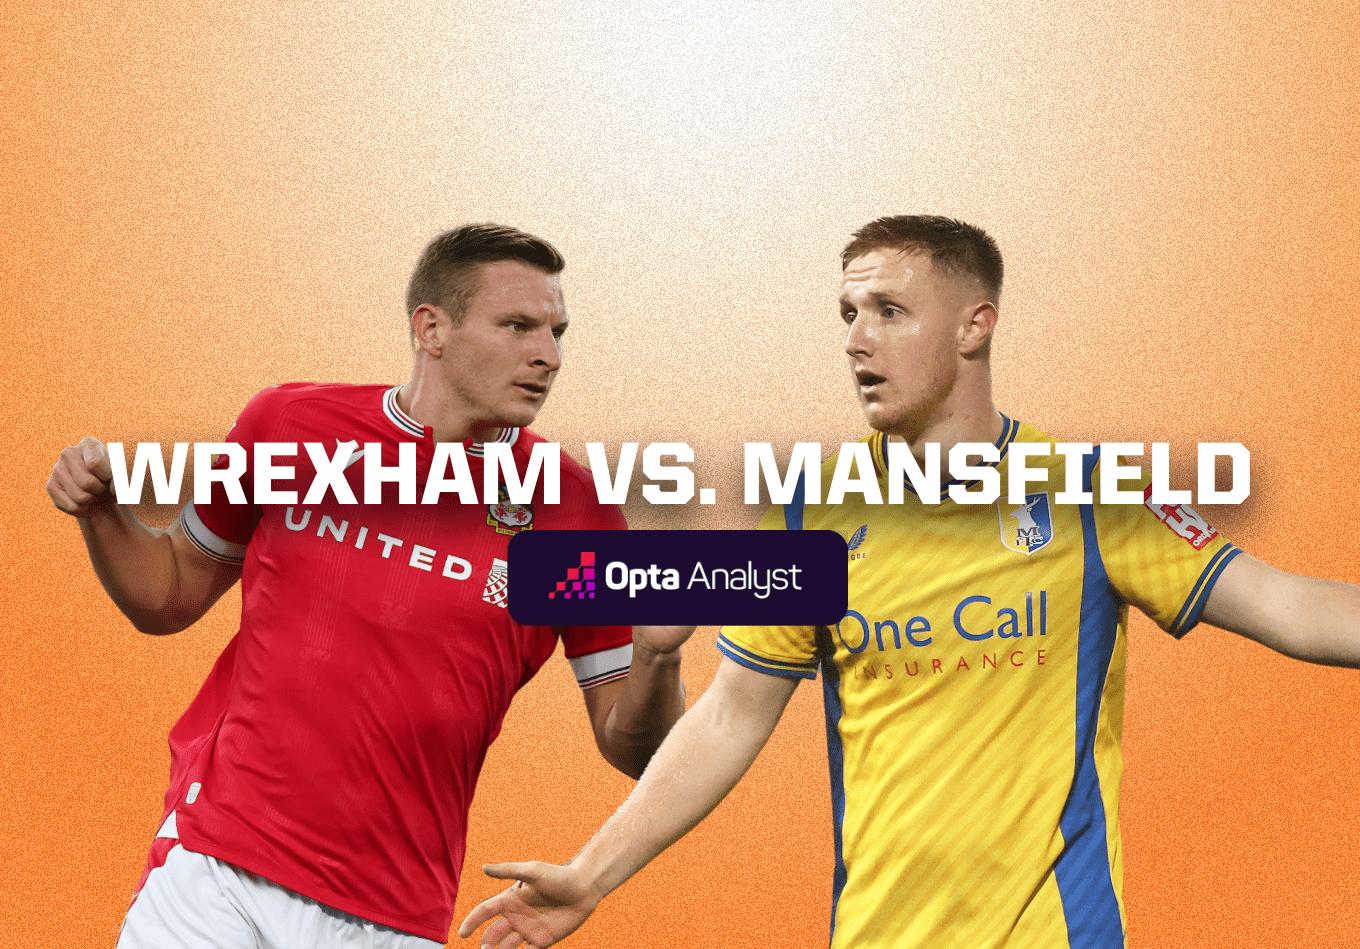 Wrexham vs Mansfield Prediction and Preview